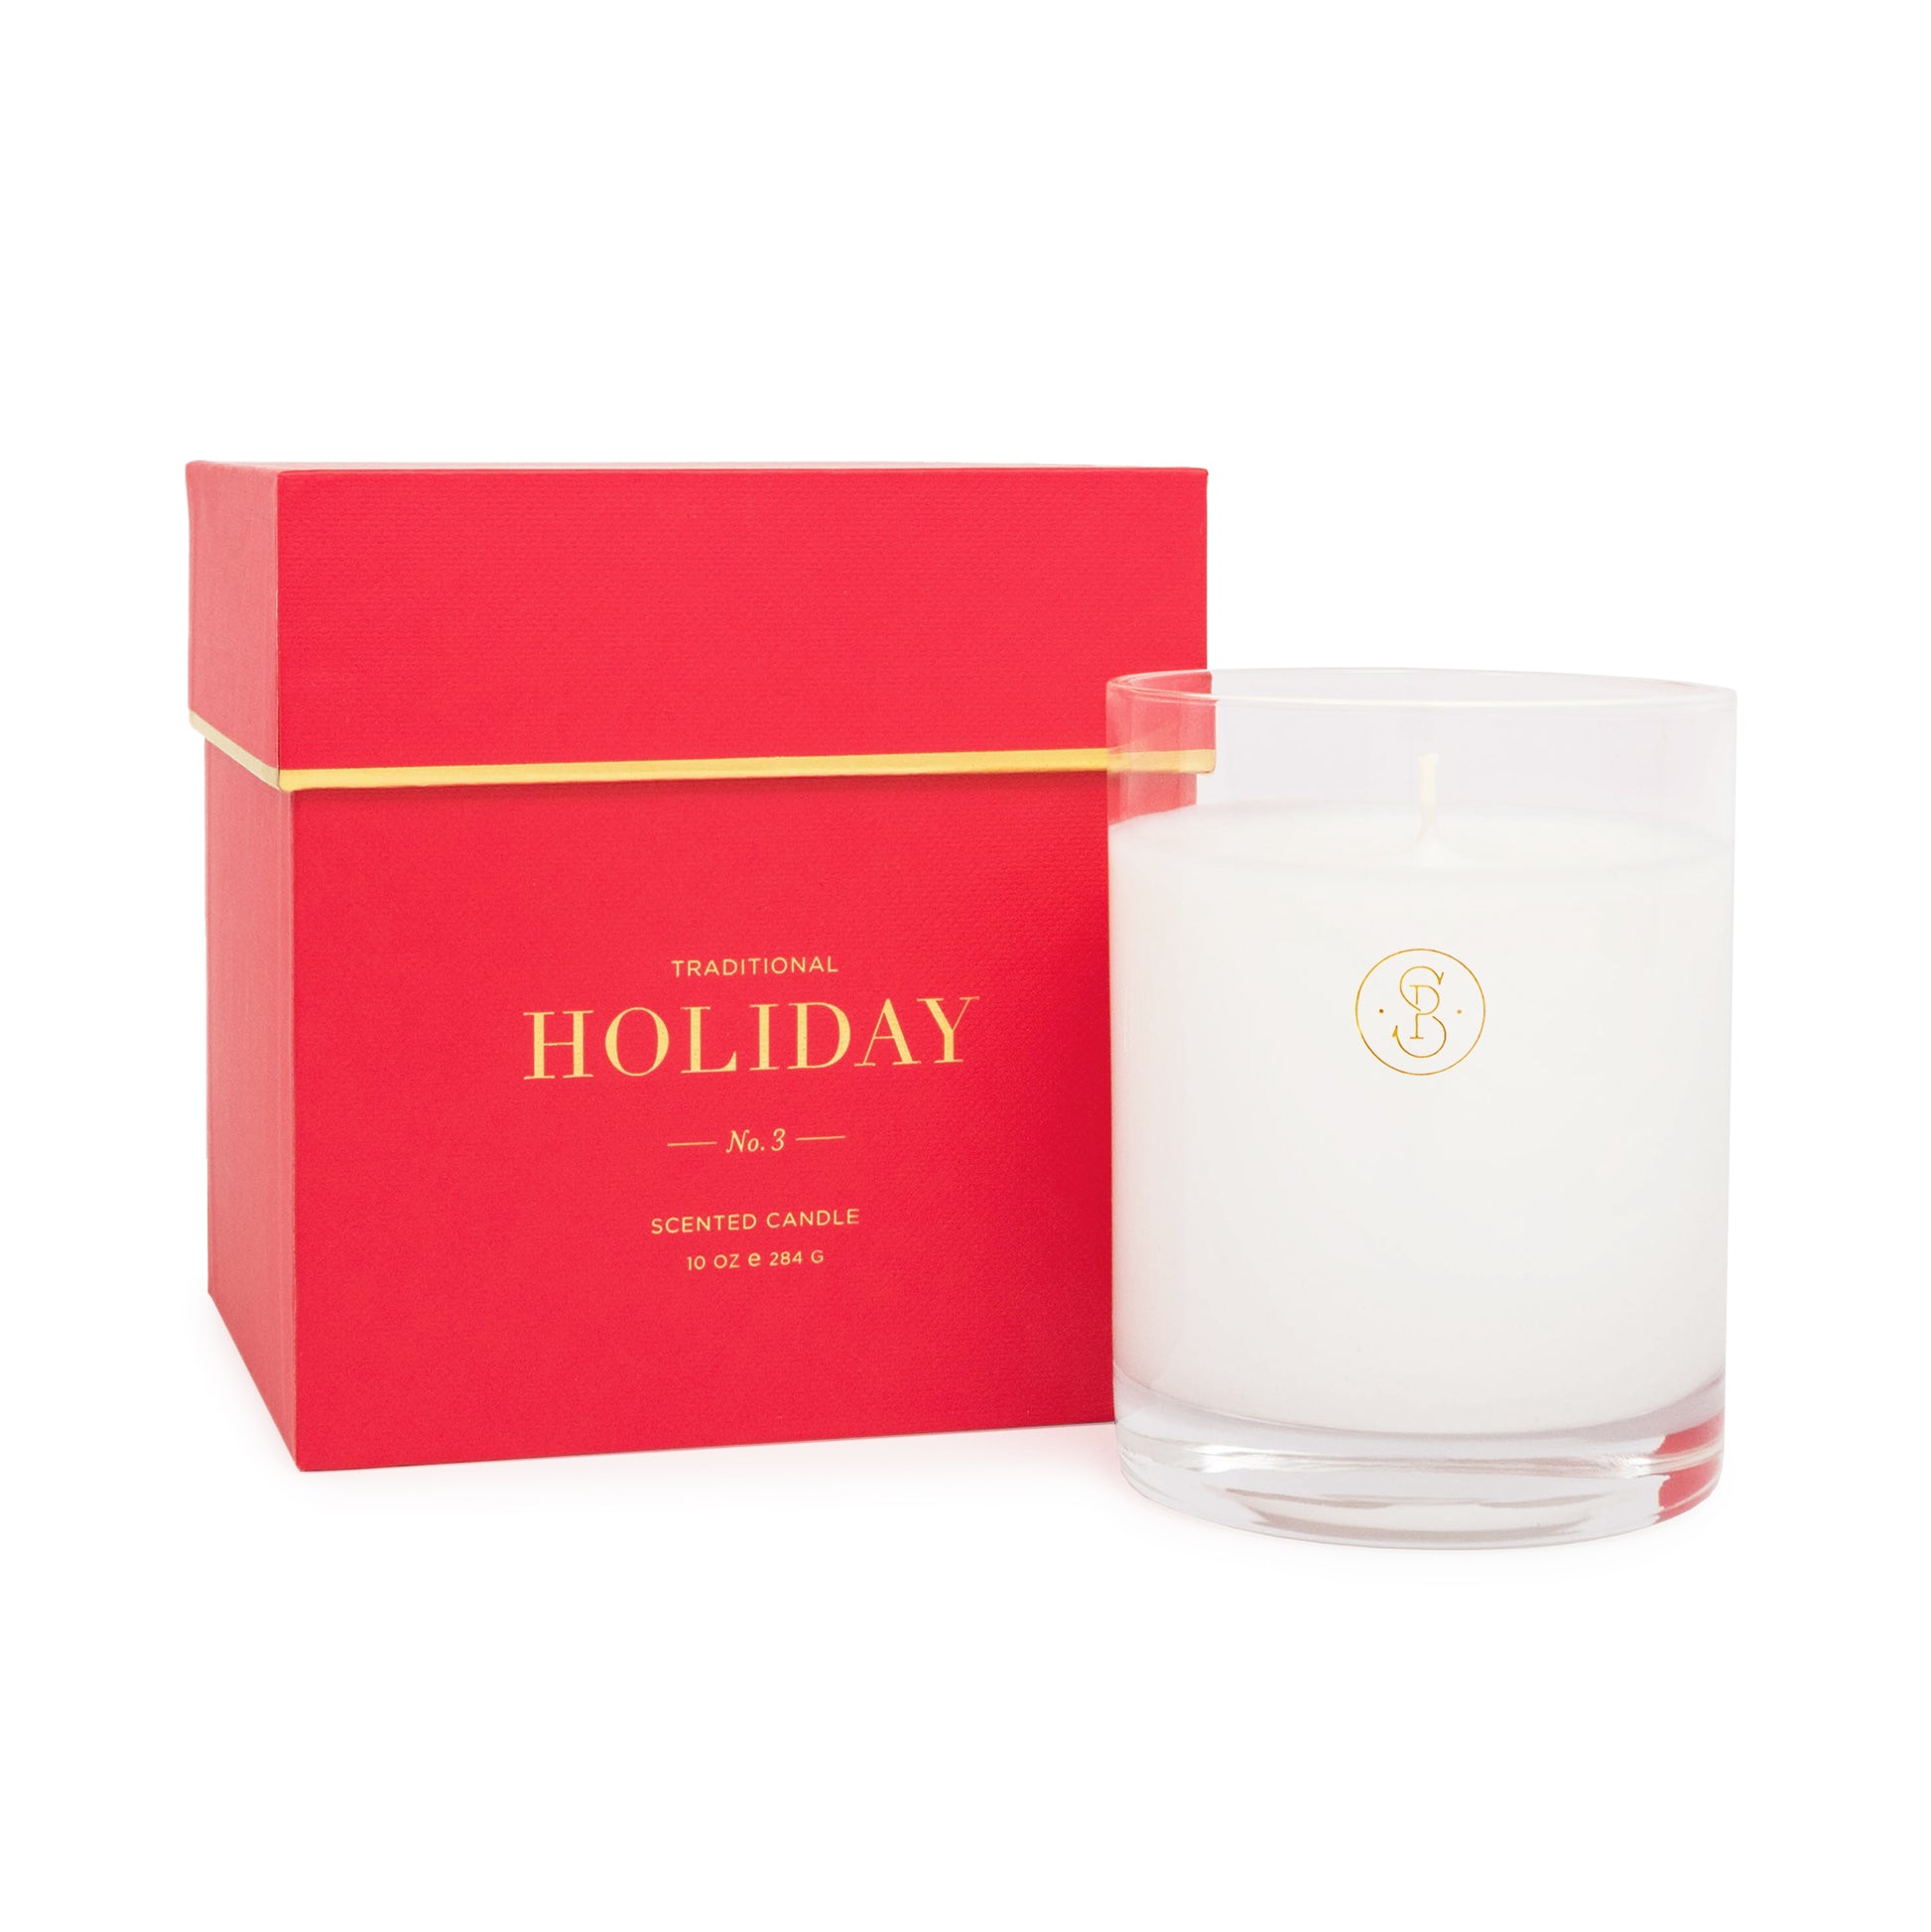 Glass candle next to red candle box - holiday fir scent